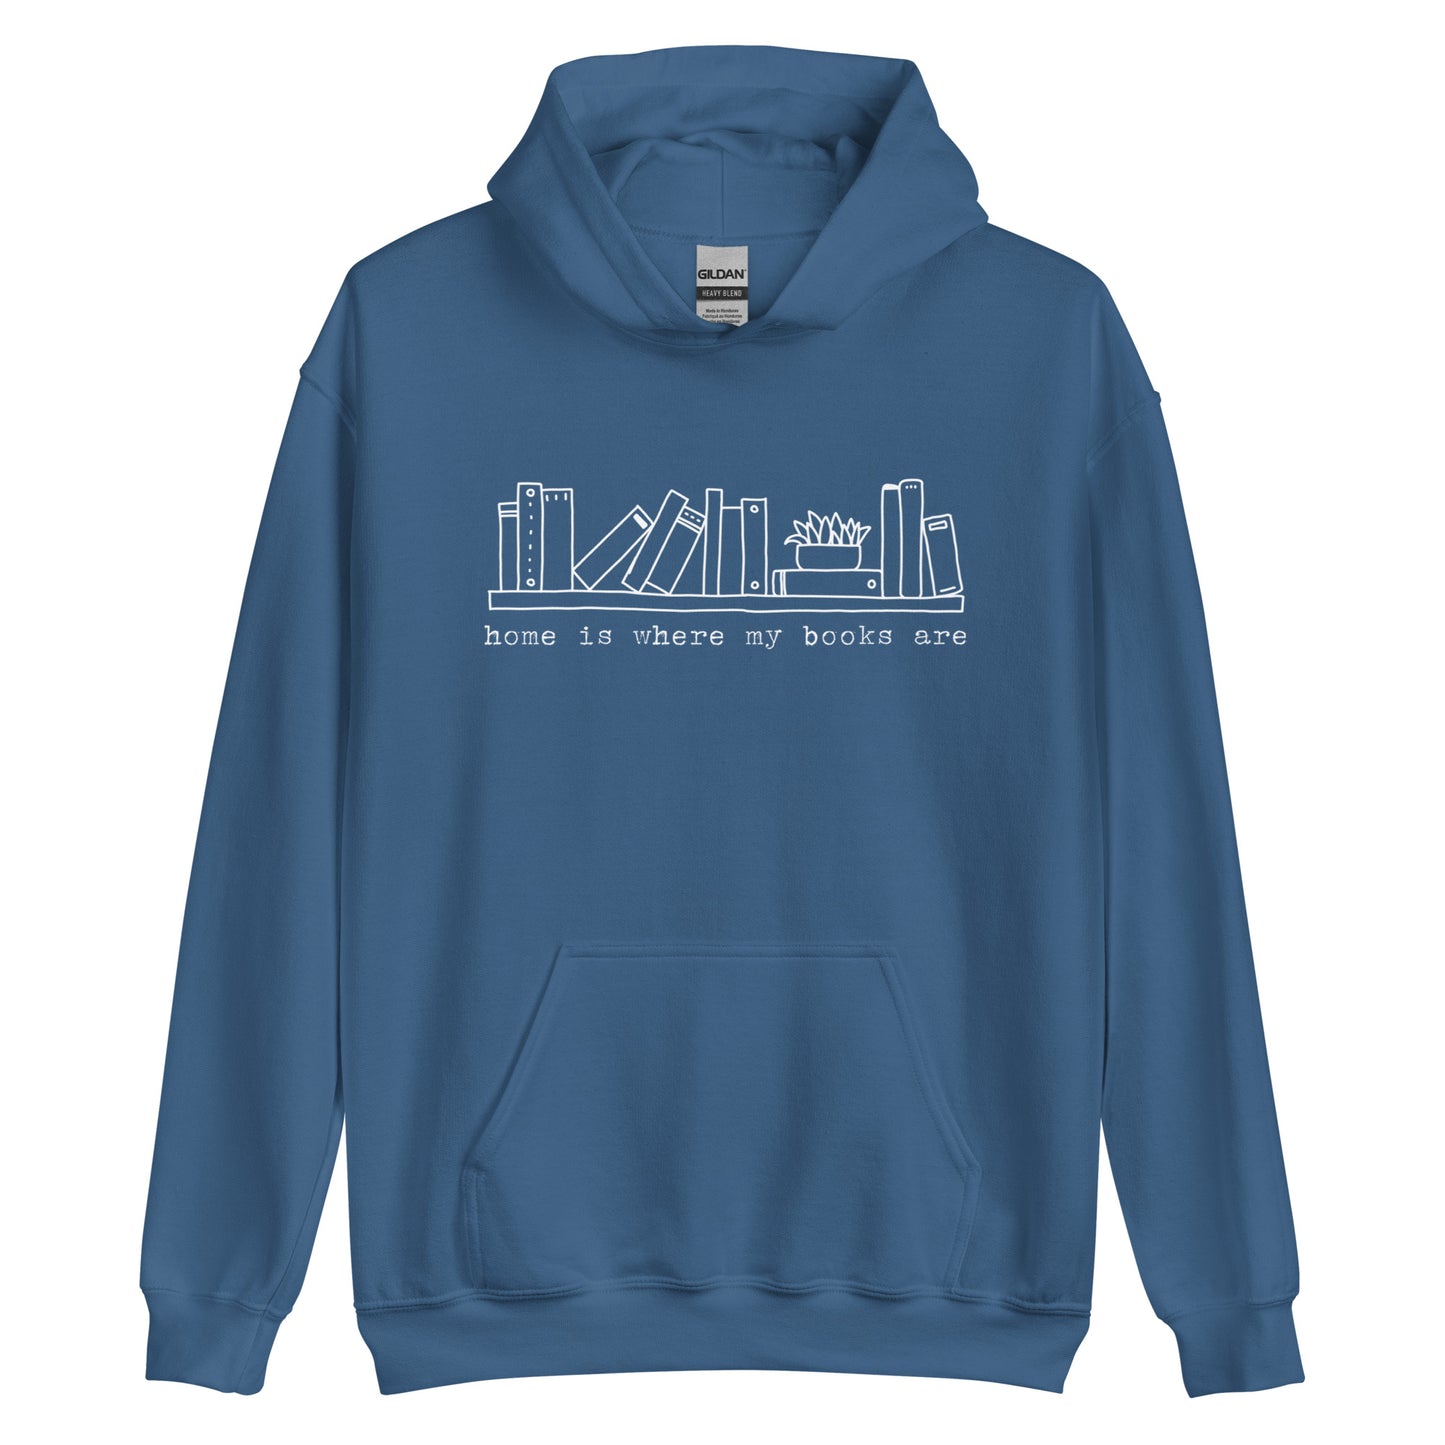 home is where my books are hoodie